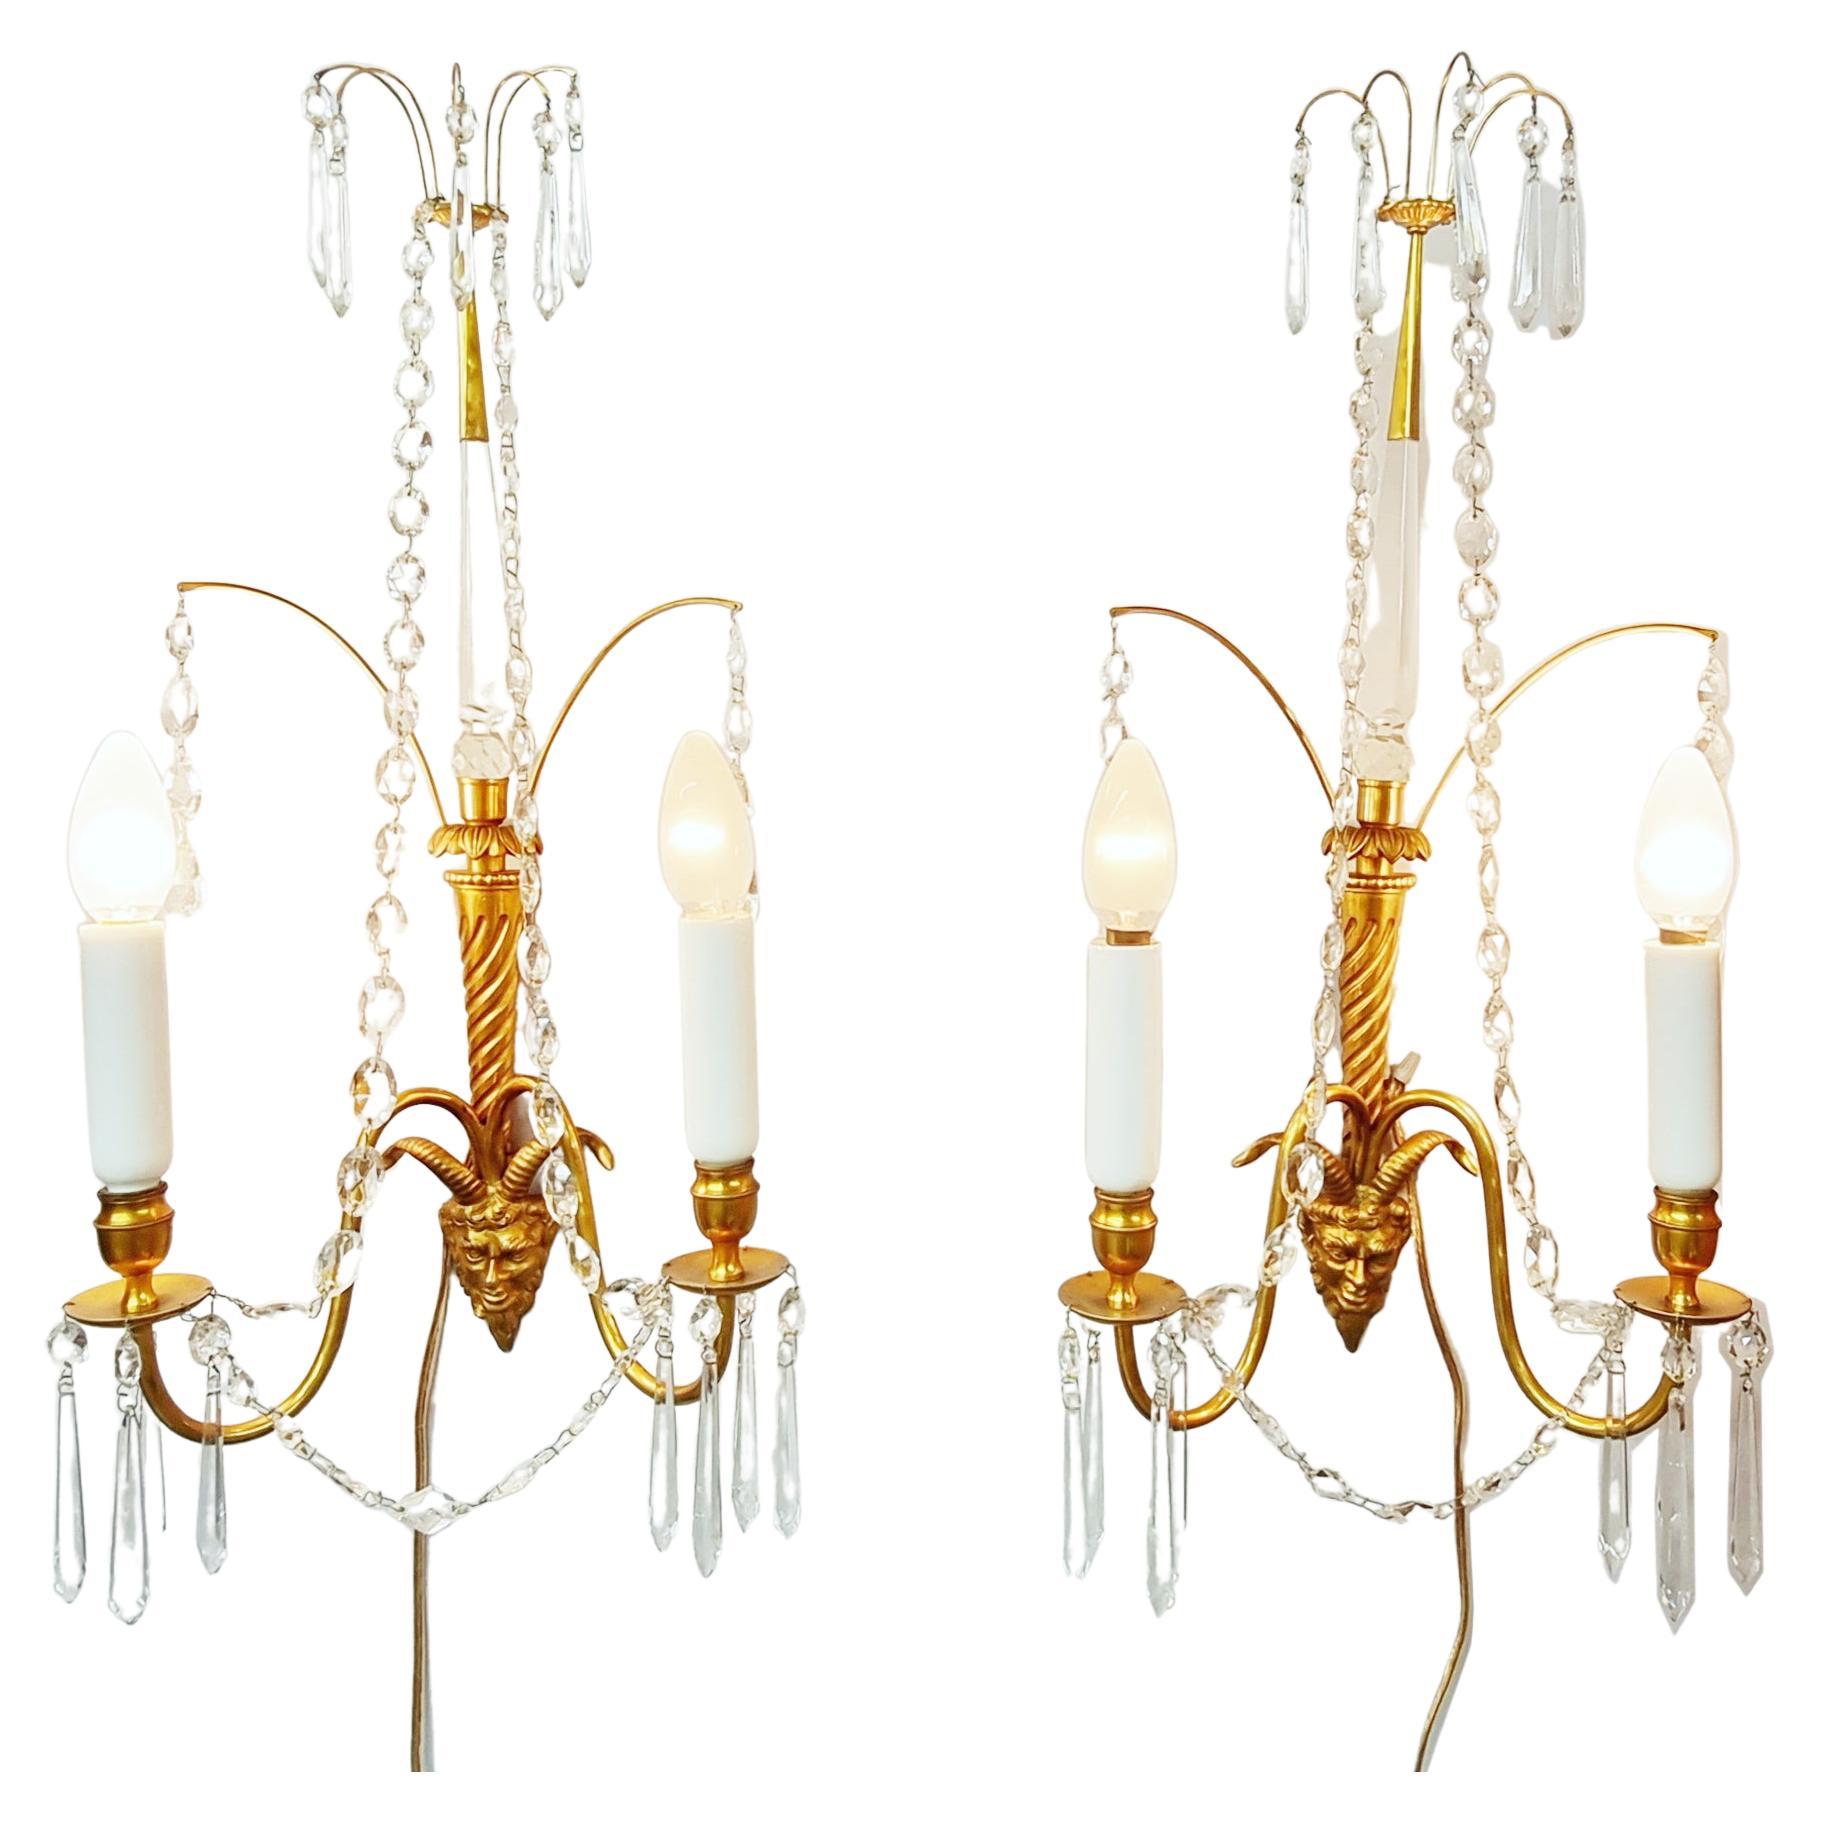 Pair of Baltic Gilt Satyr Faun Head Wall Sconces, Late 19th / Early 20th Century For Sale